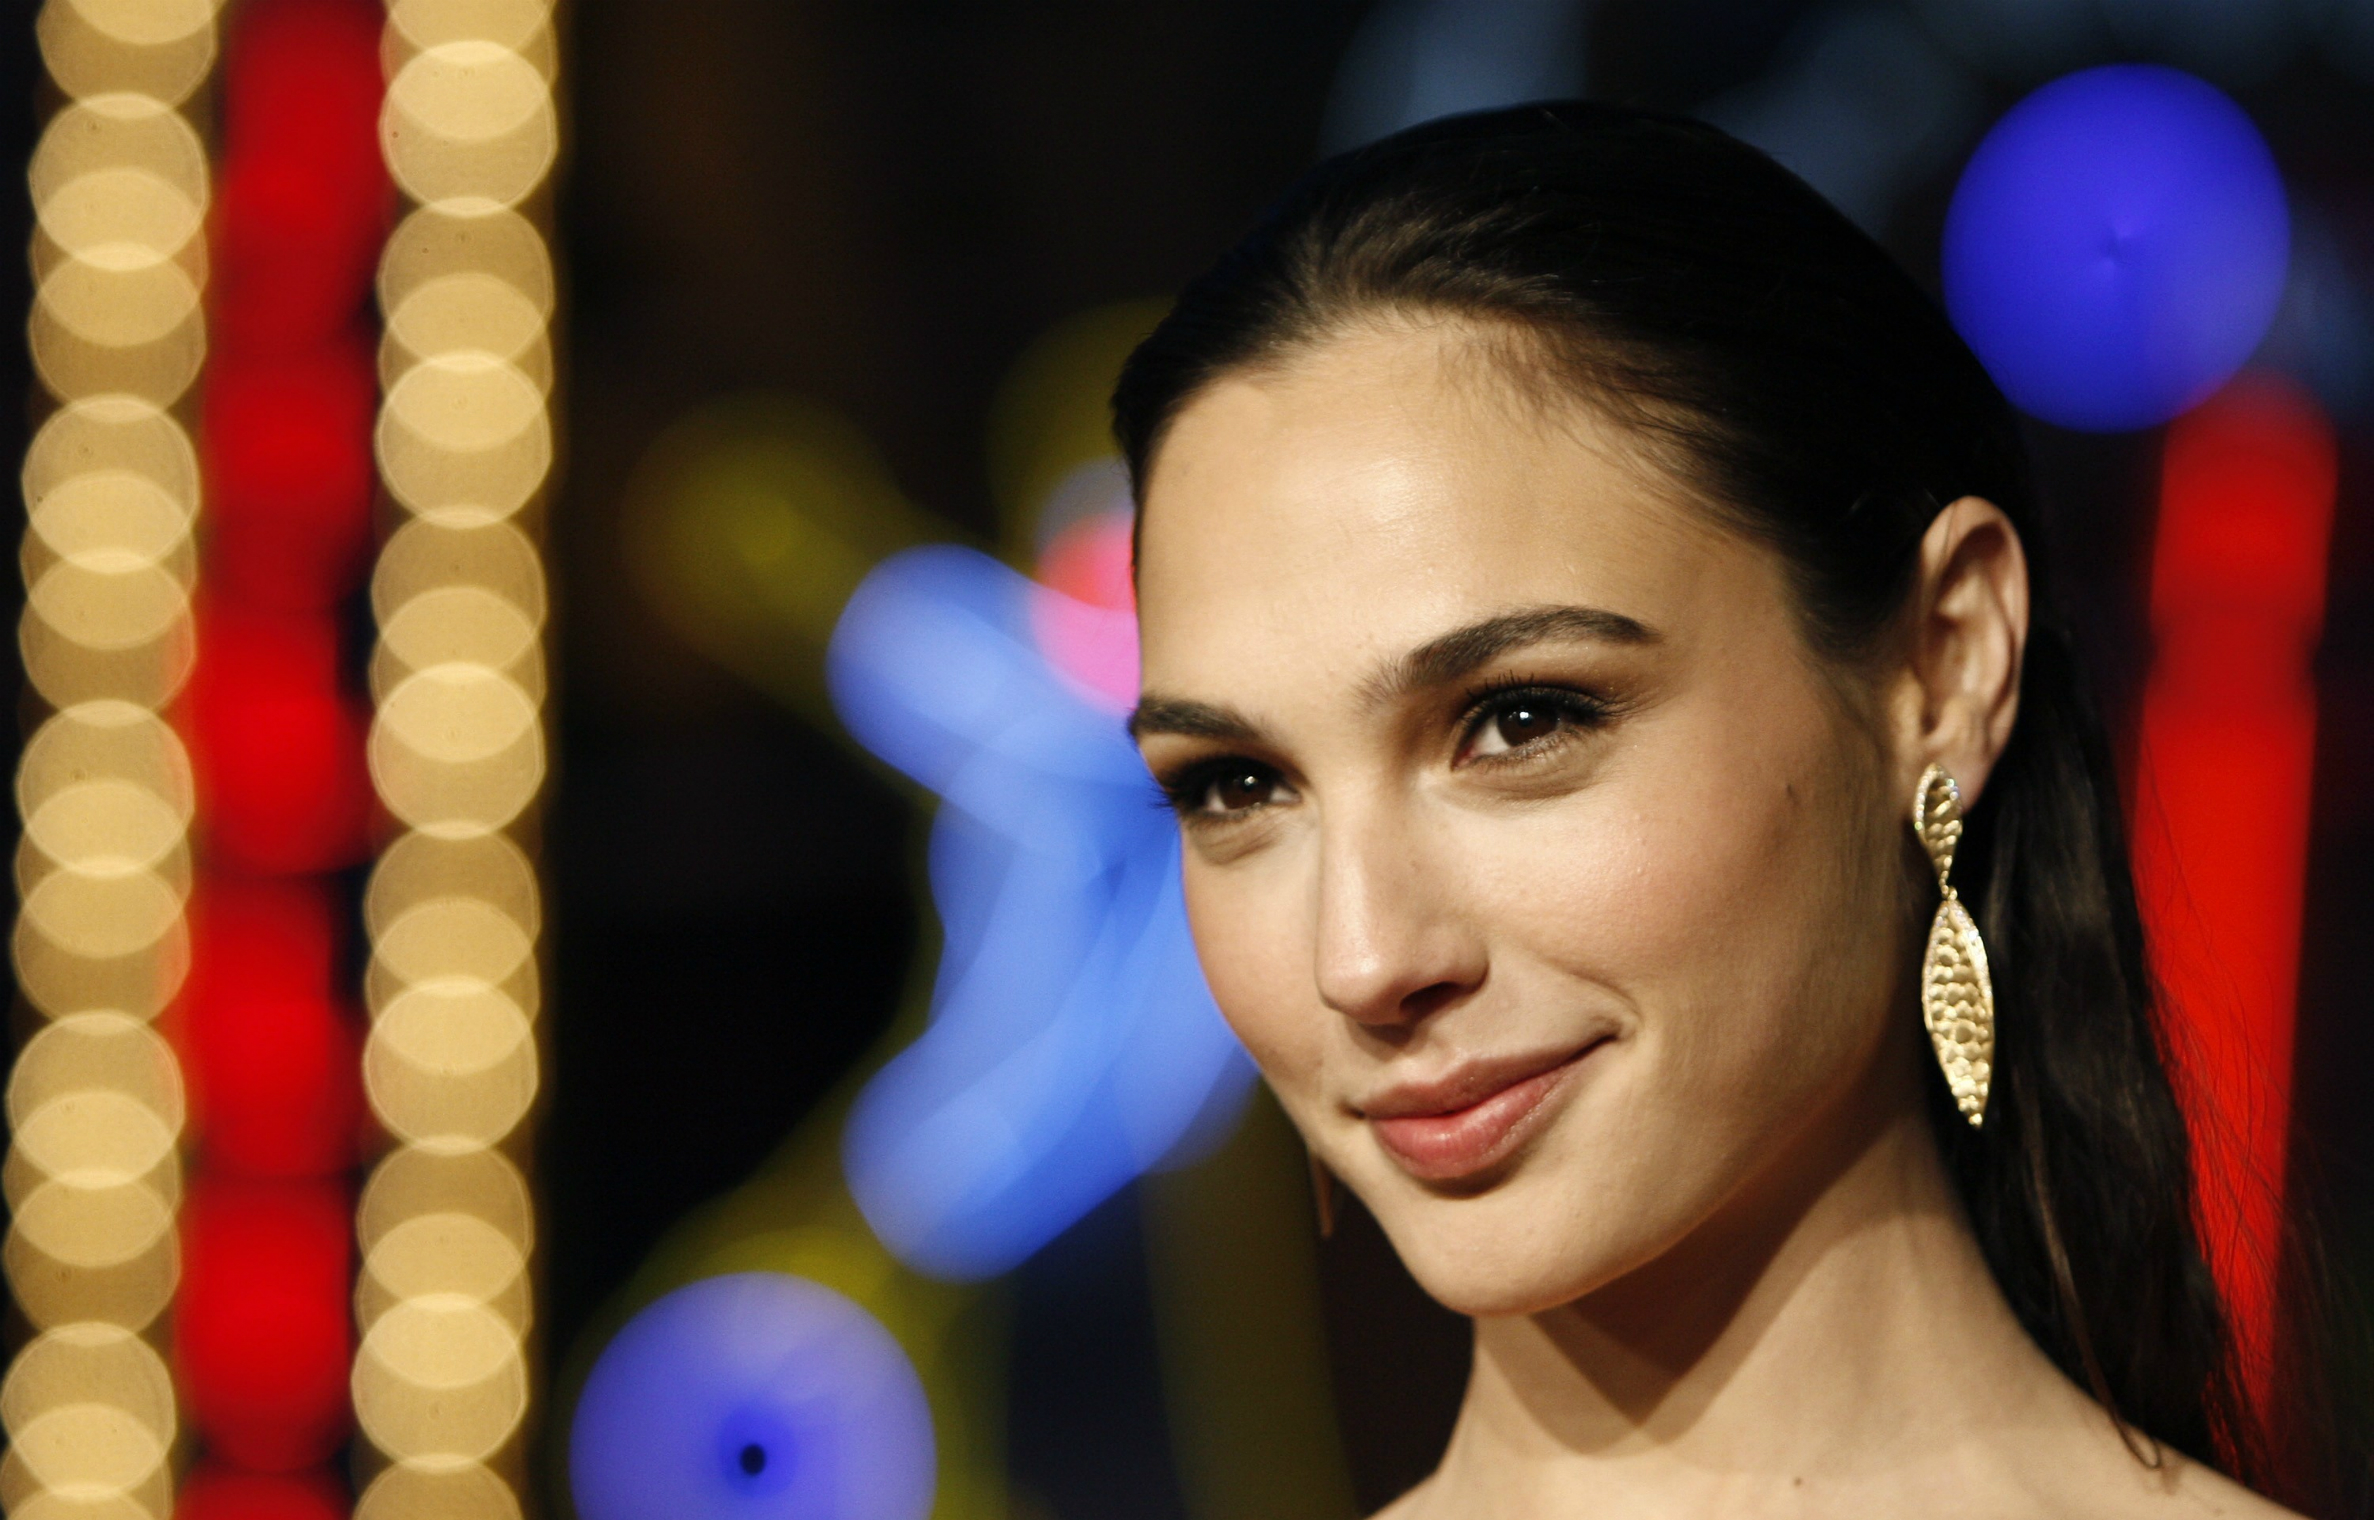 Gal Gadot, stunning in her celebrity glamour, poses for this delightful desktop wallpaper.